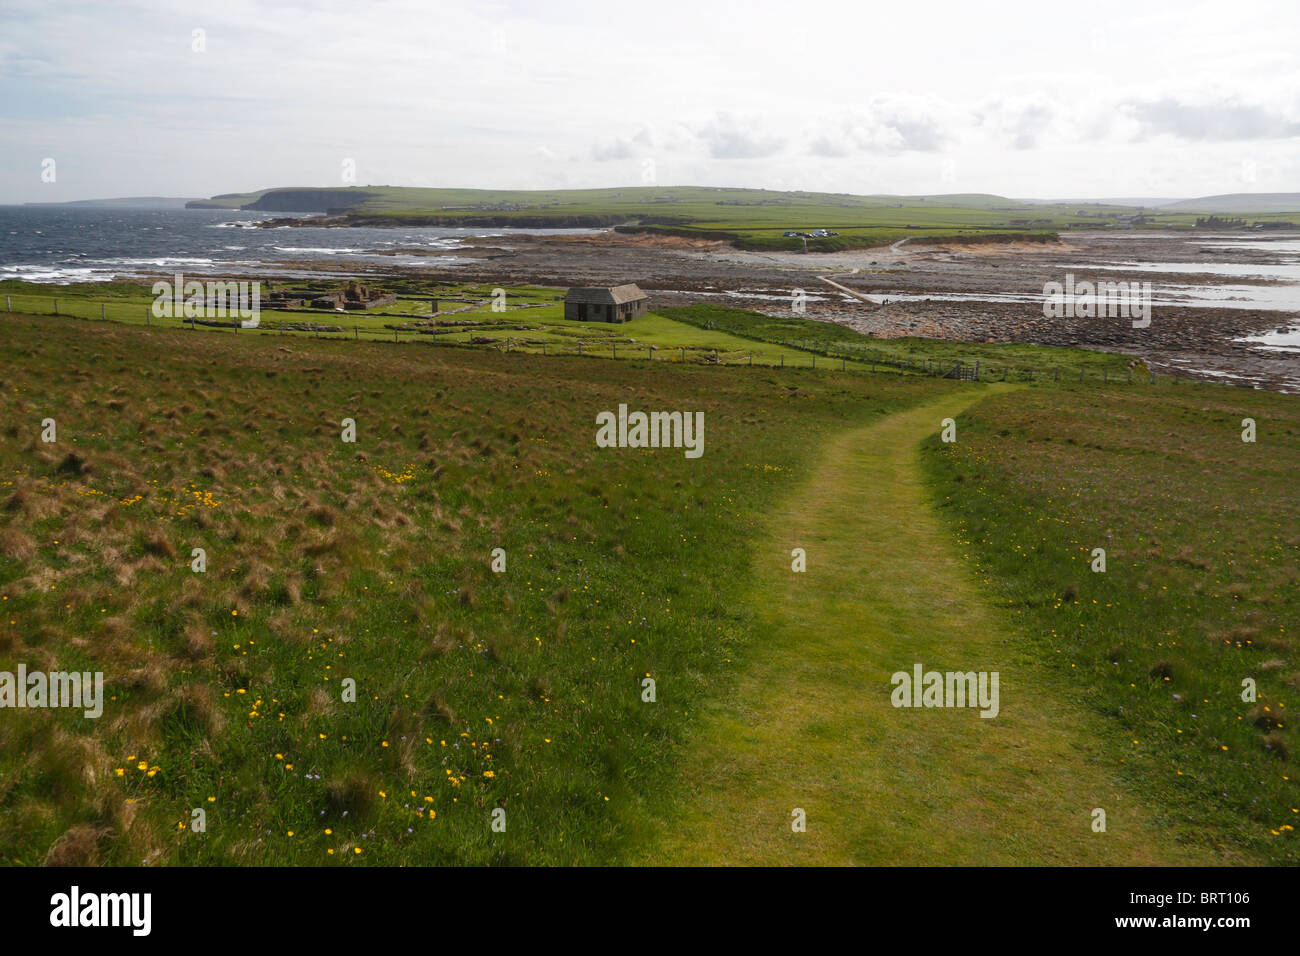 View of the Pictish and Viking ruins on the Brough of Birsay, Orkney, Scotland Stock Photo